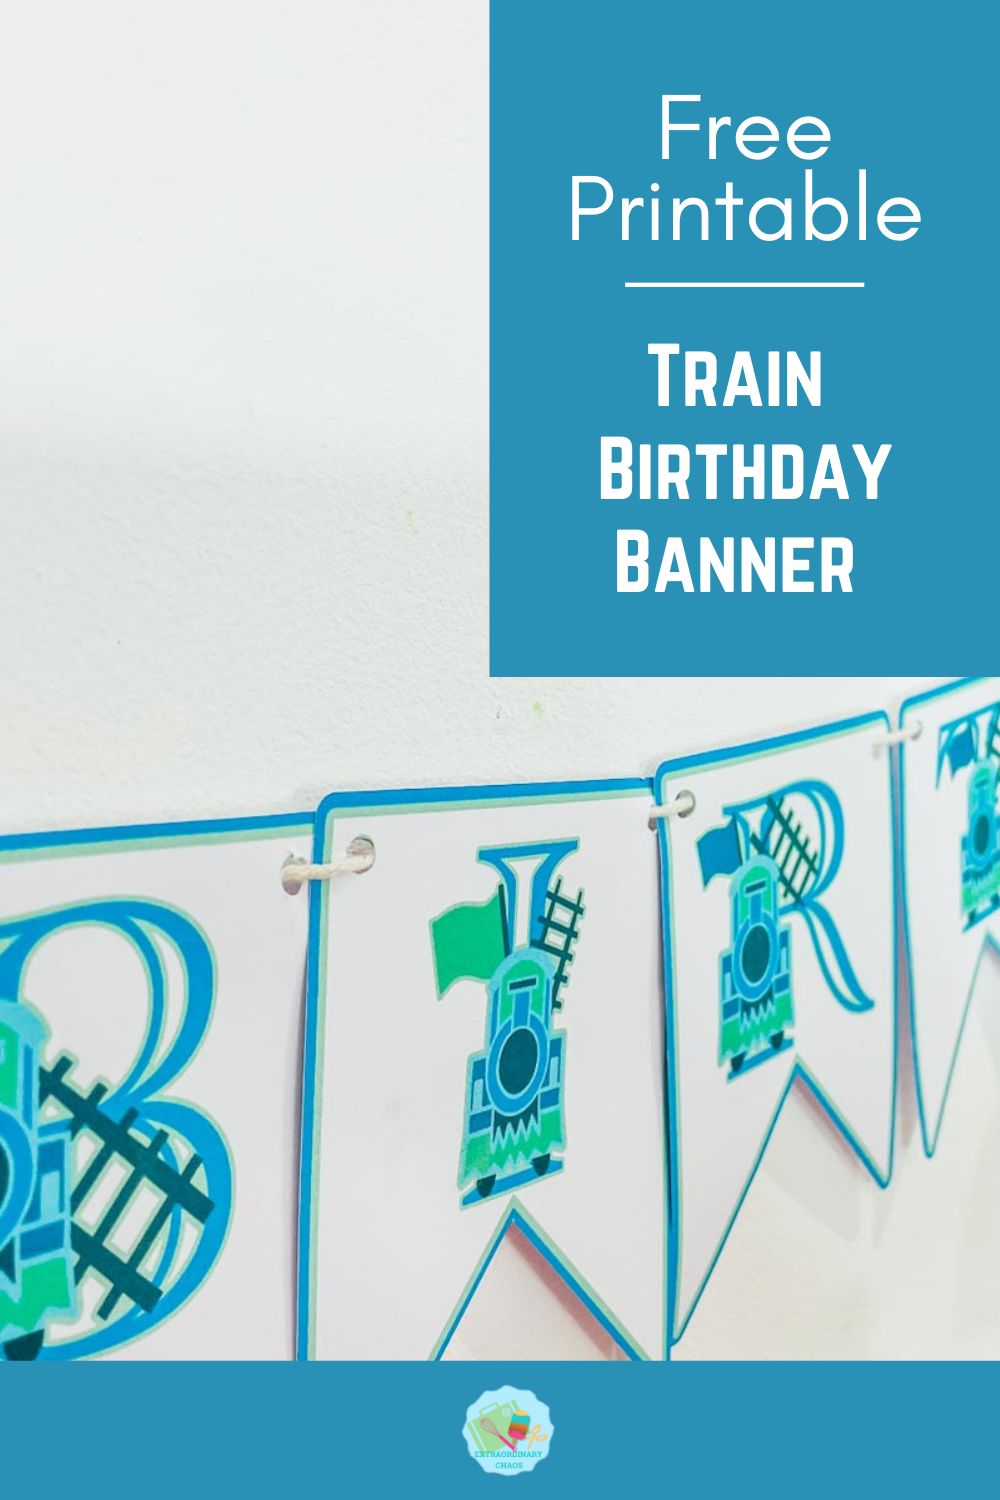 Free Printable Train Happy Birthday Banner To Print of and cut our for train themed birthday parties